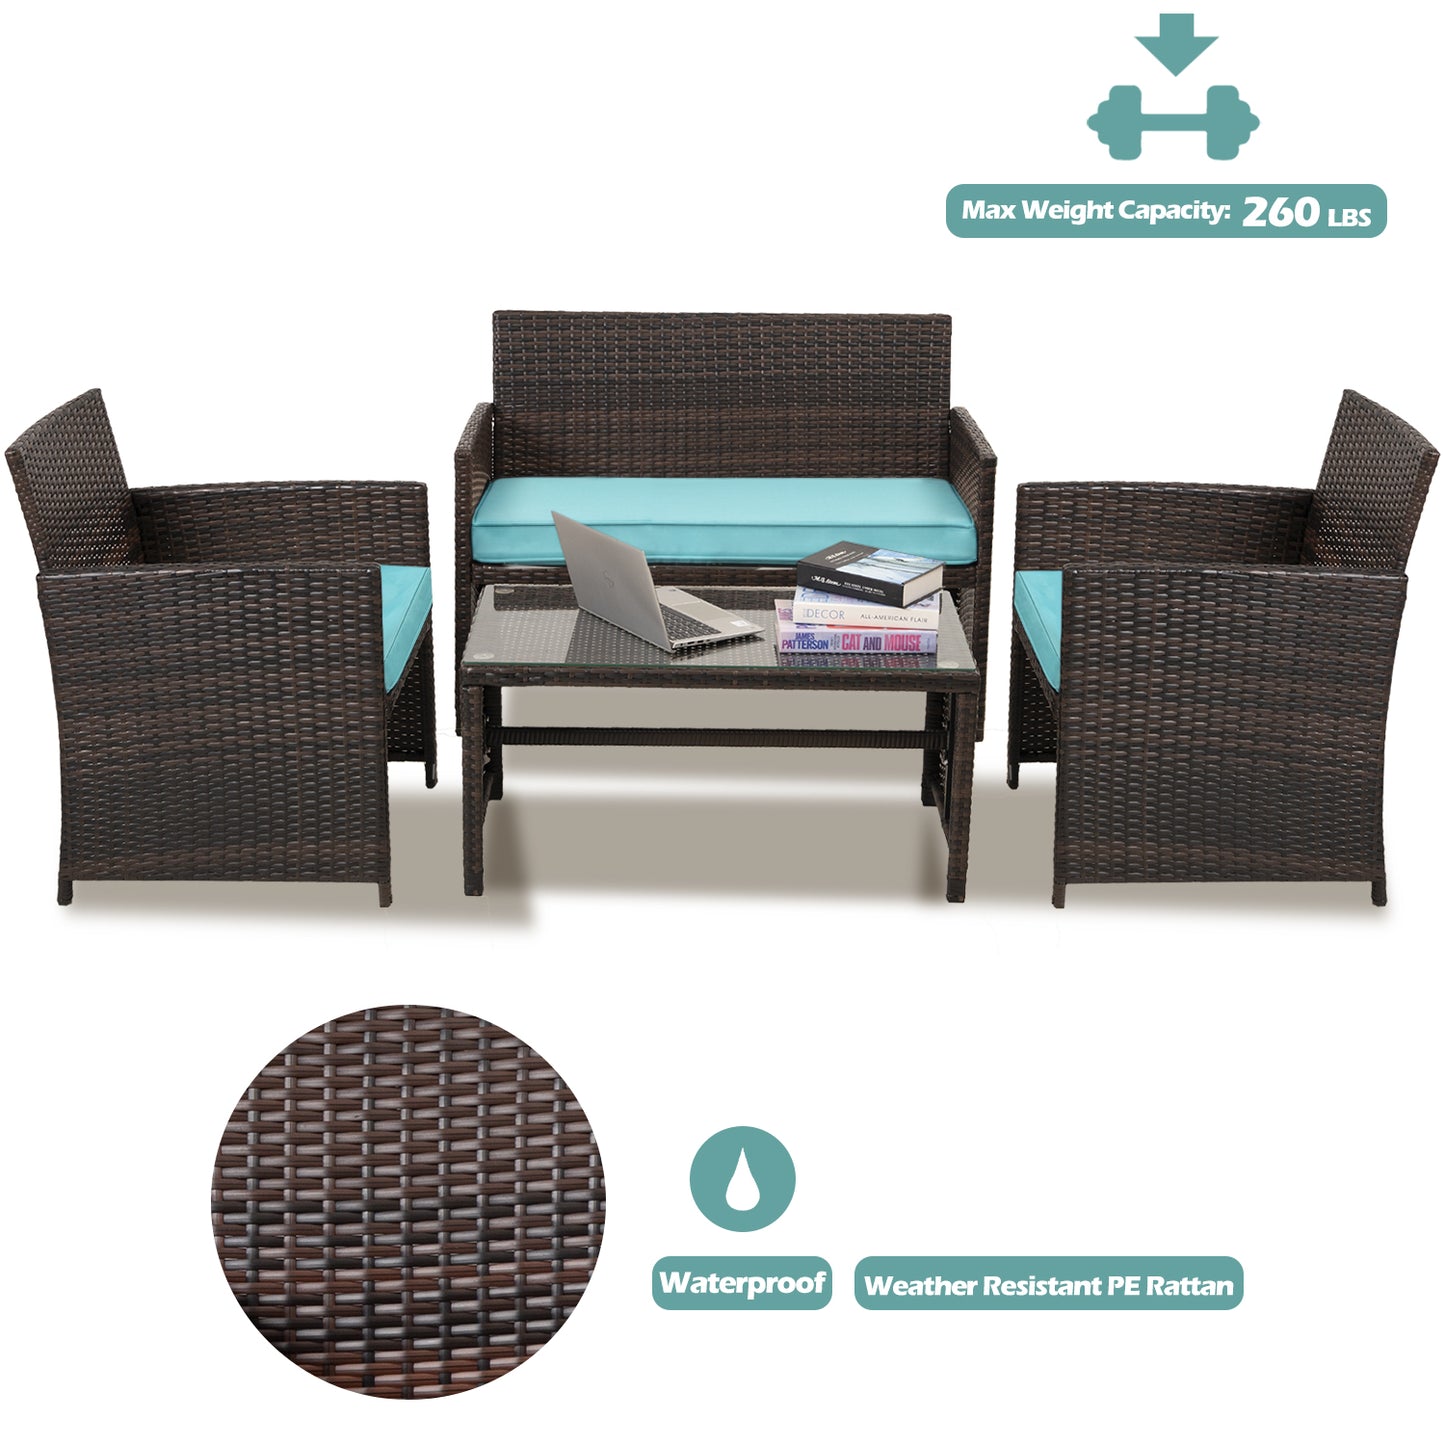 Cpintltr 4 Pieces Outdoor Wicker Furniture Sets PE Rattan